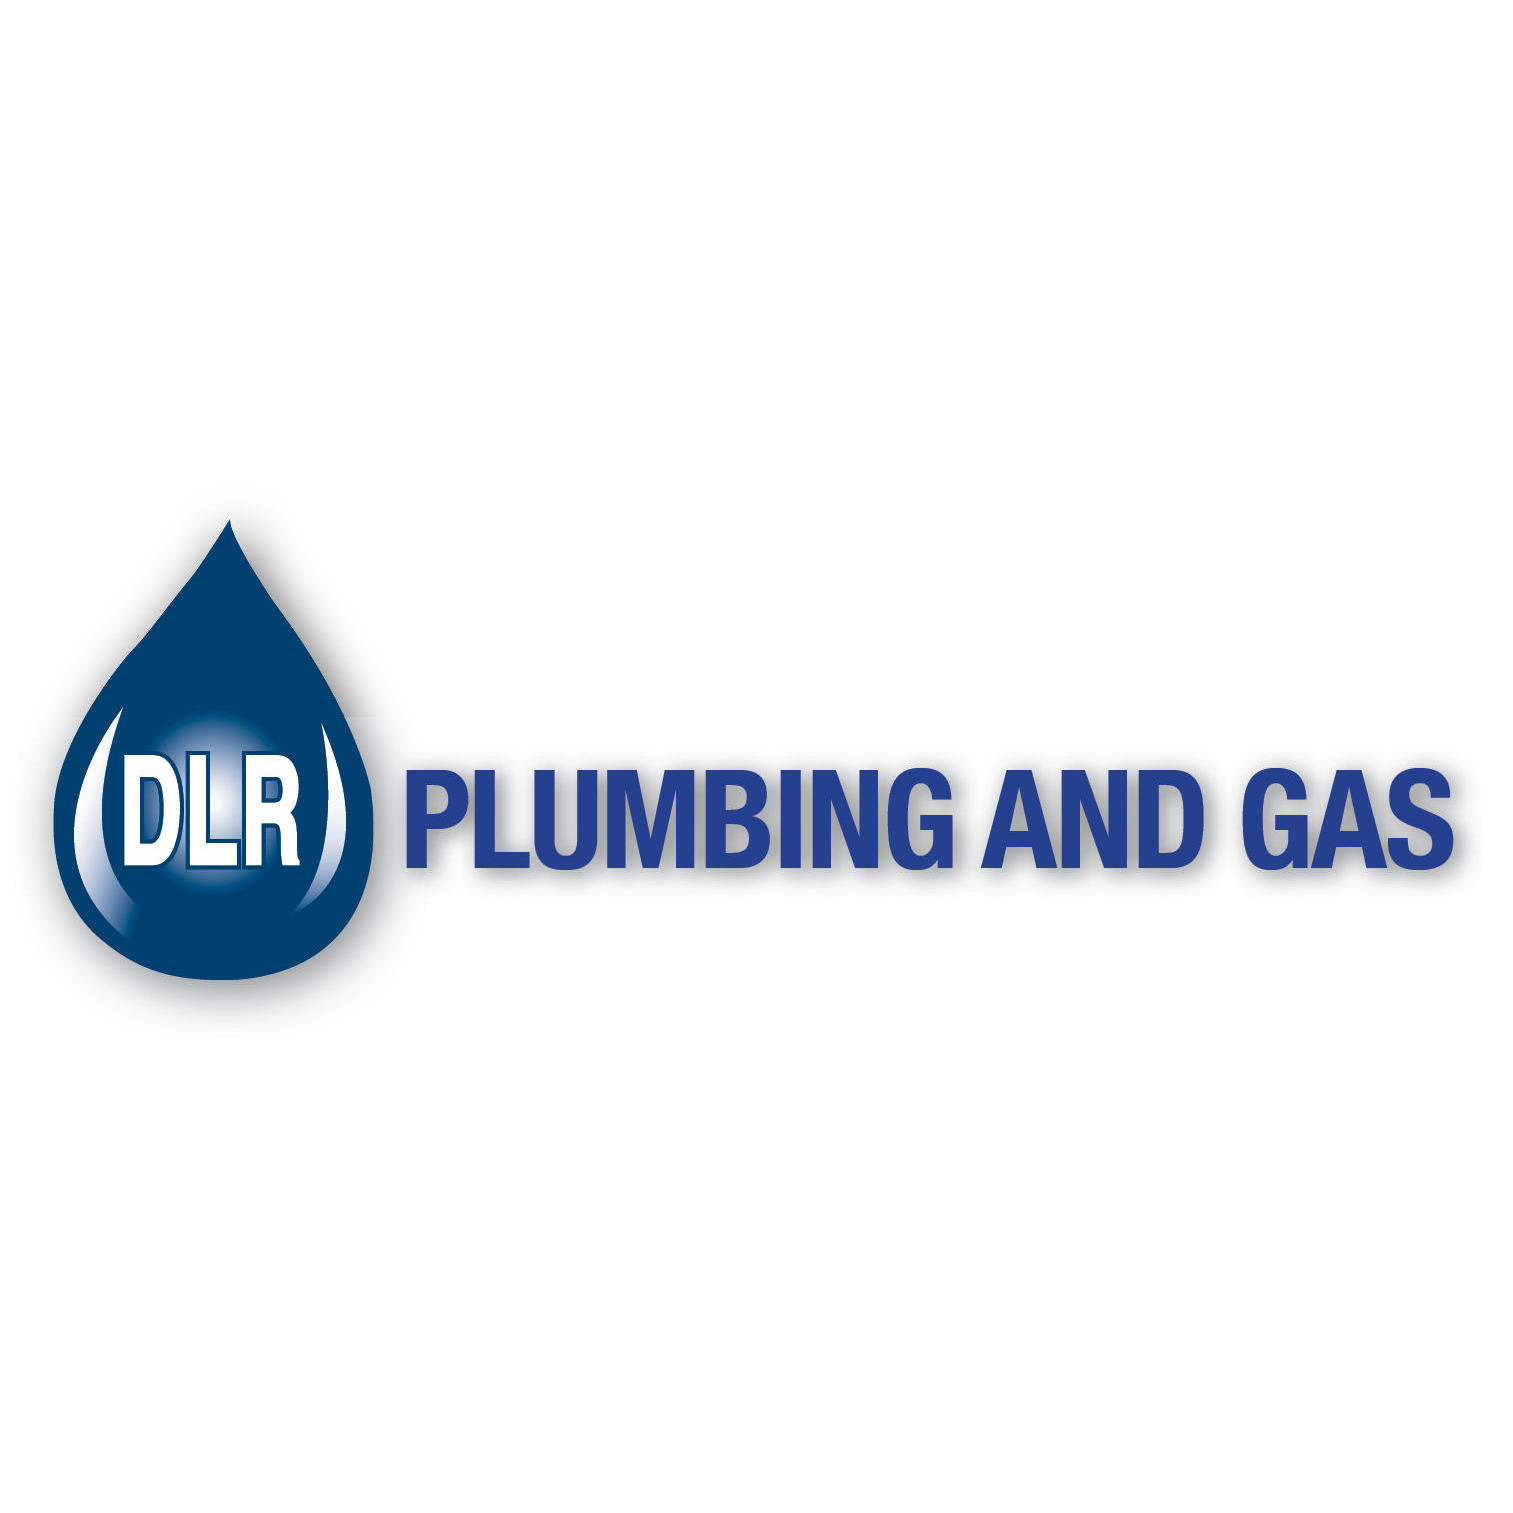 DLR Plumbing and Gas PL8879 Newman 0438 793 690